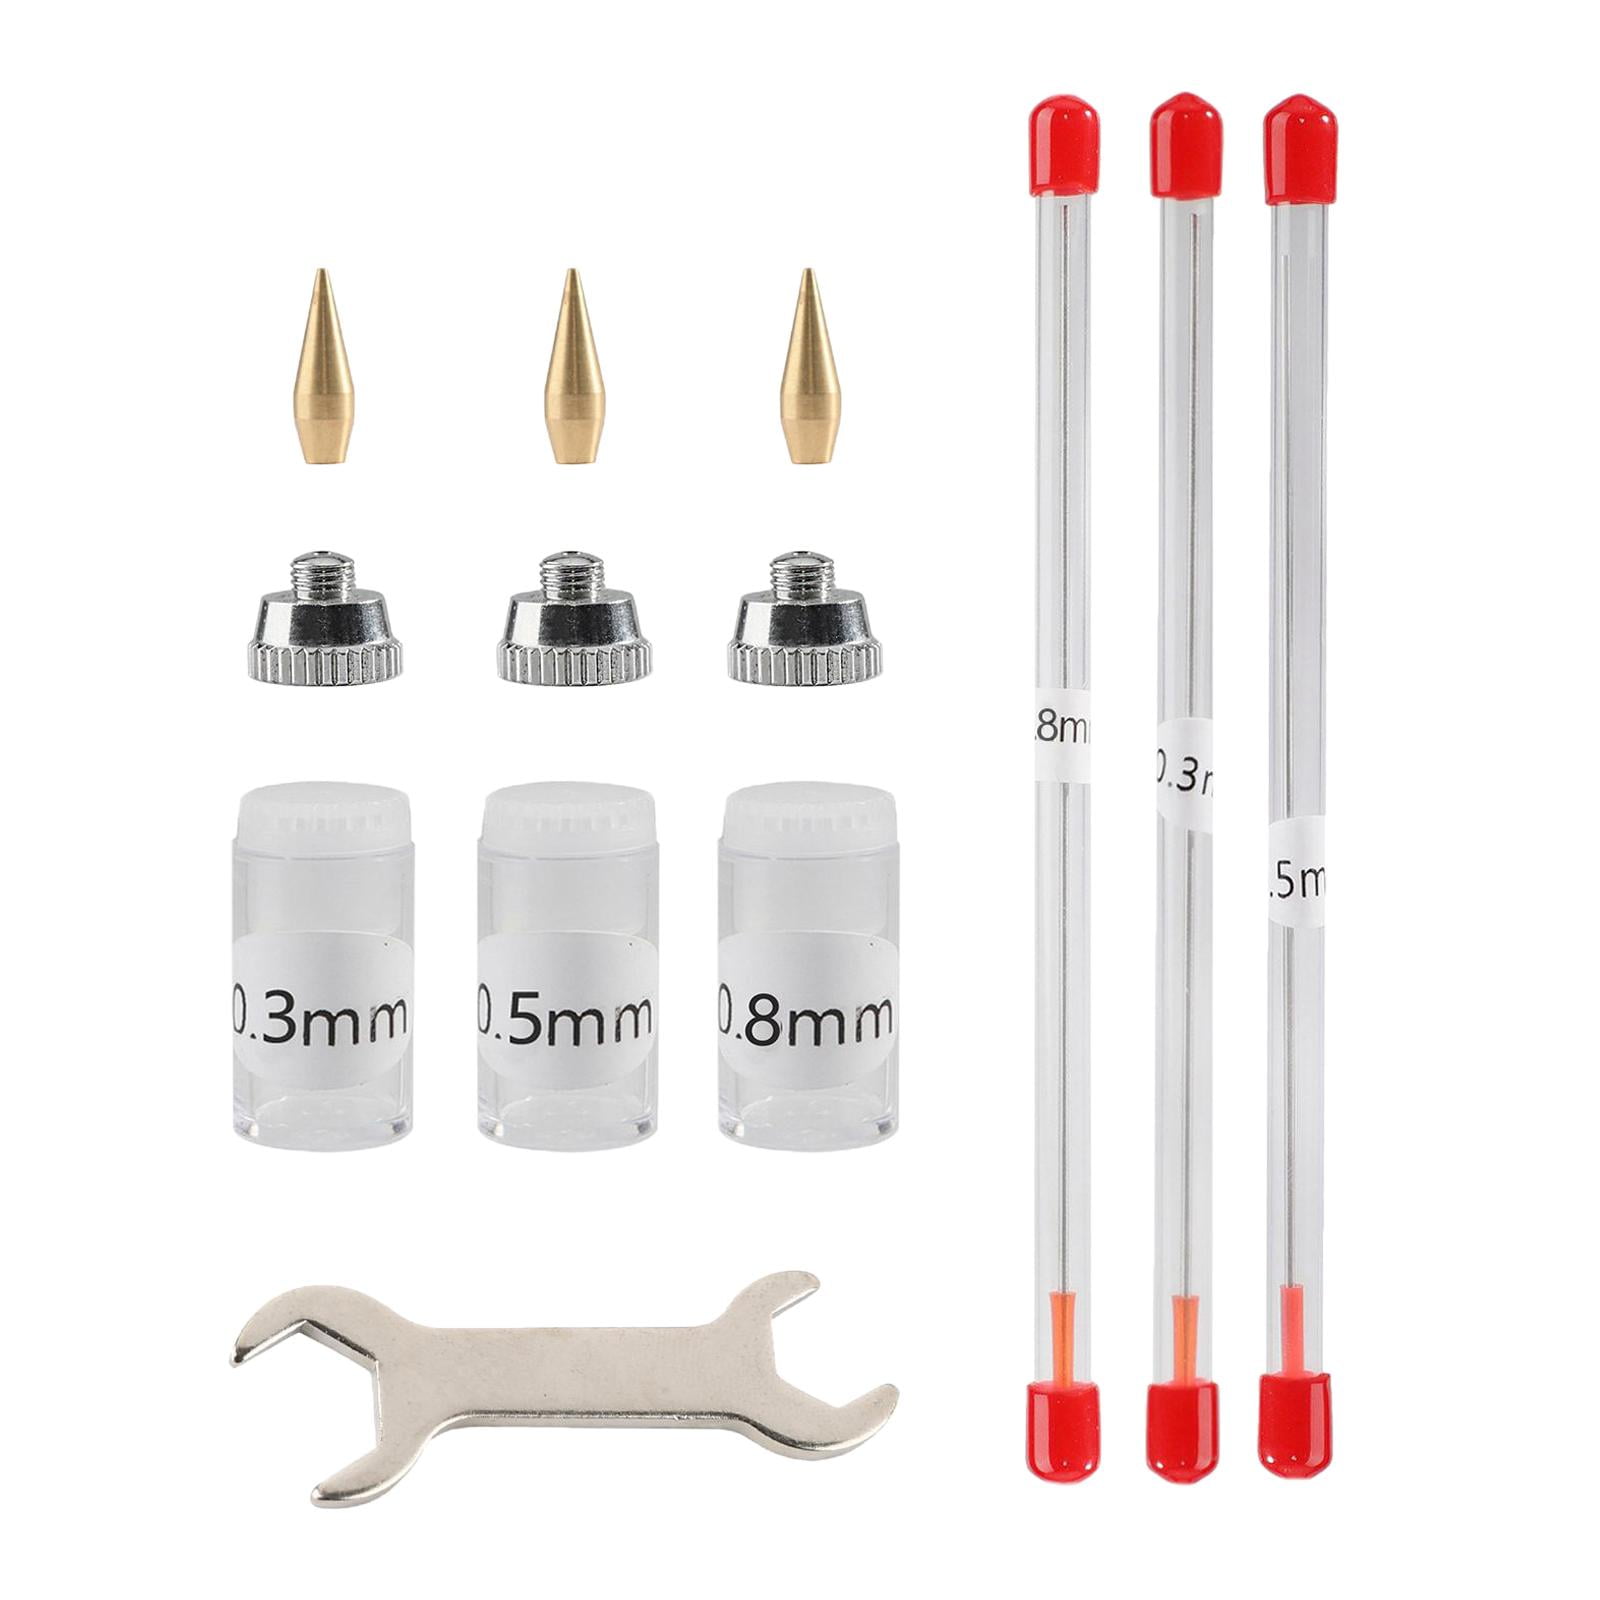 0.2/0.3/0.5mm Airbrush Nozzle Needle Replacement Parts for Airbrushes Spray  Gun